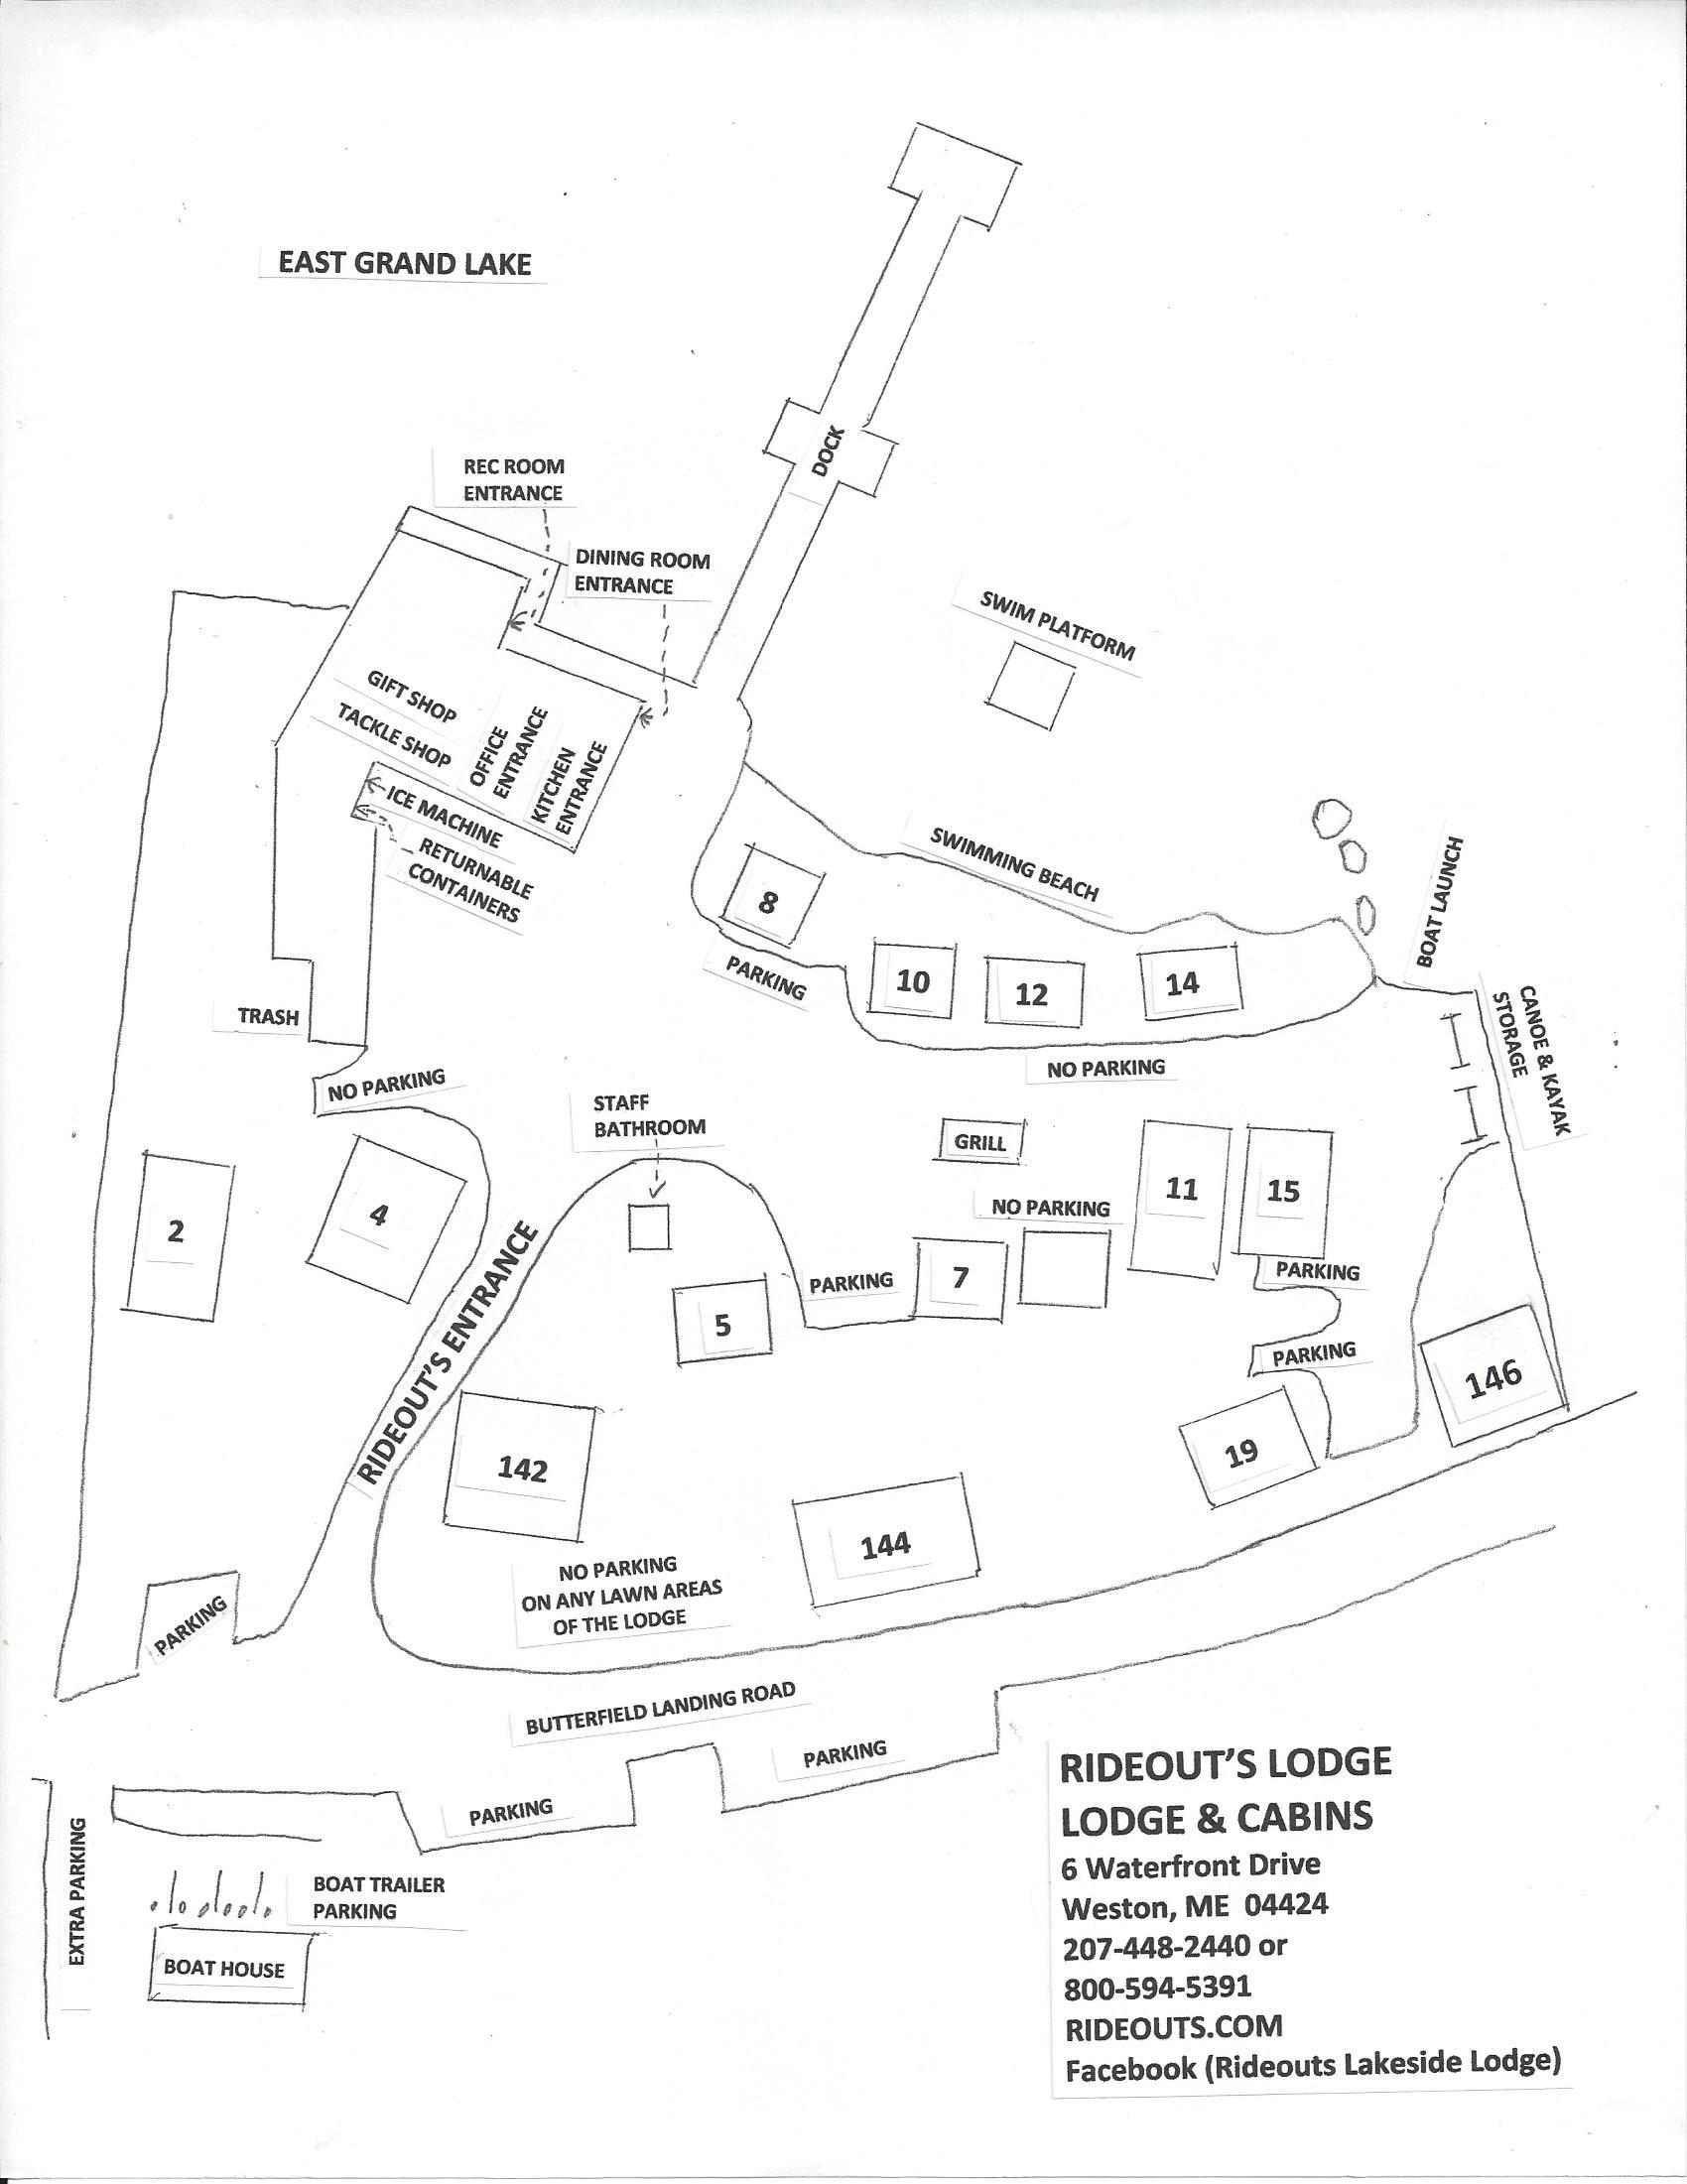 Site map with cabin 146 added